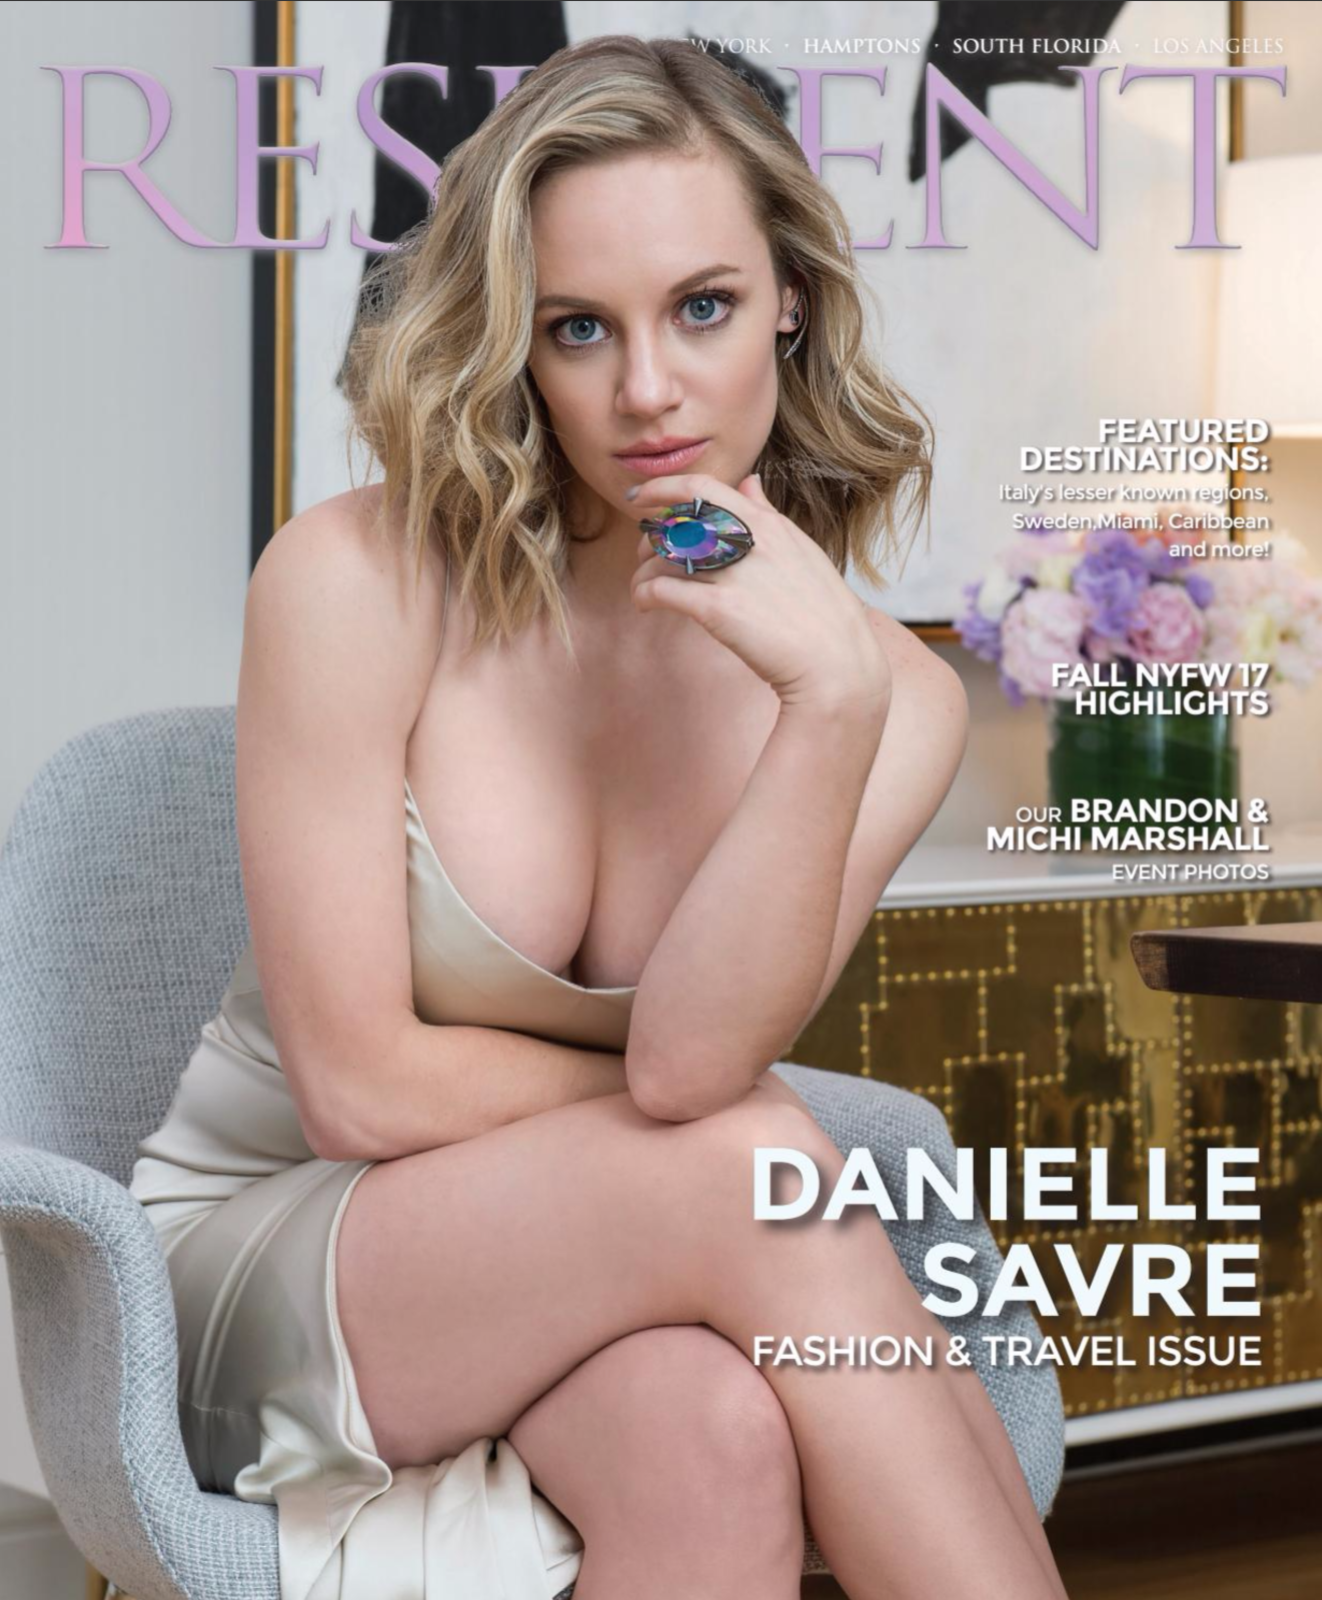 Danielle Savre by photographer Andrew Werner, Resident Magazine March 2017 - Cover.png